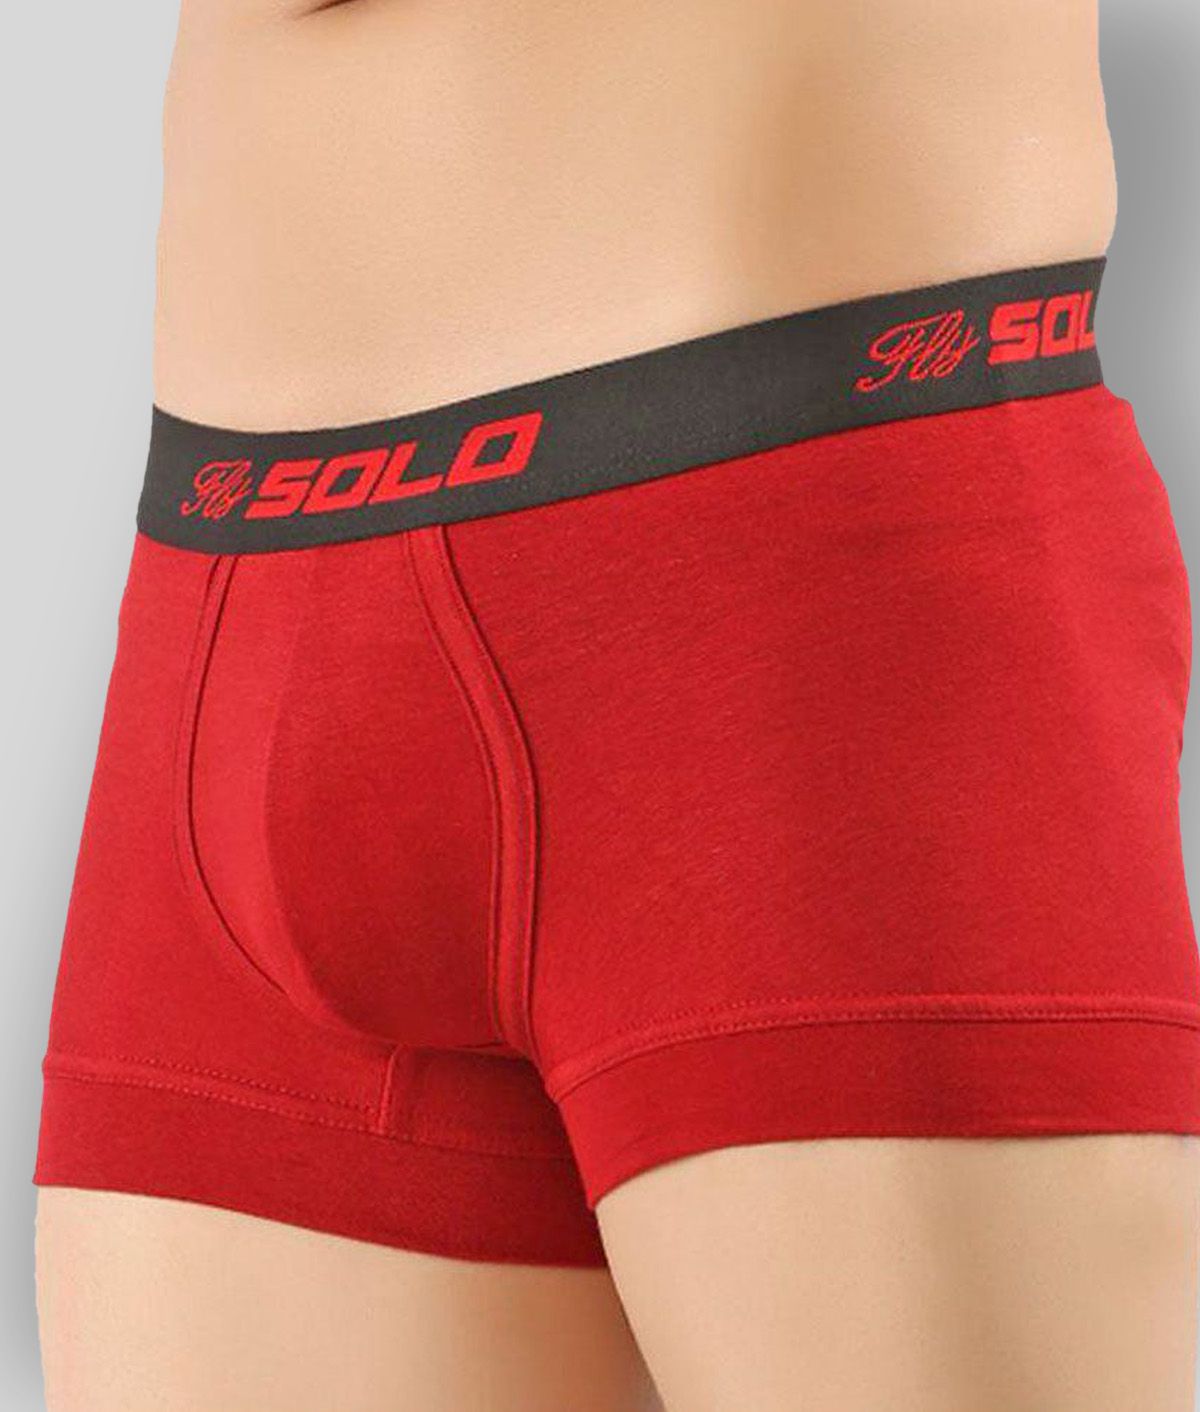     			Solo - Red Cotton Blend Men's Trunks ( Pack of 1 )